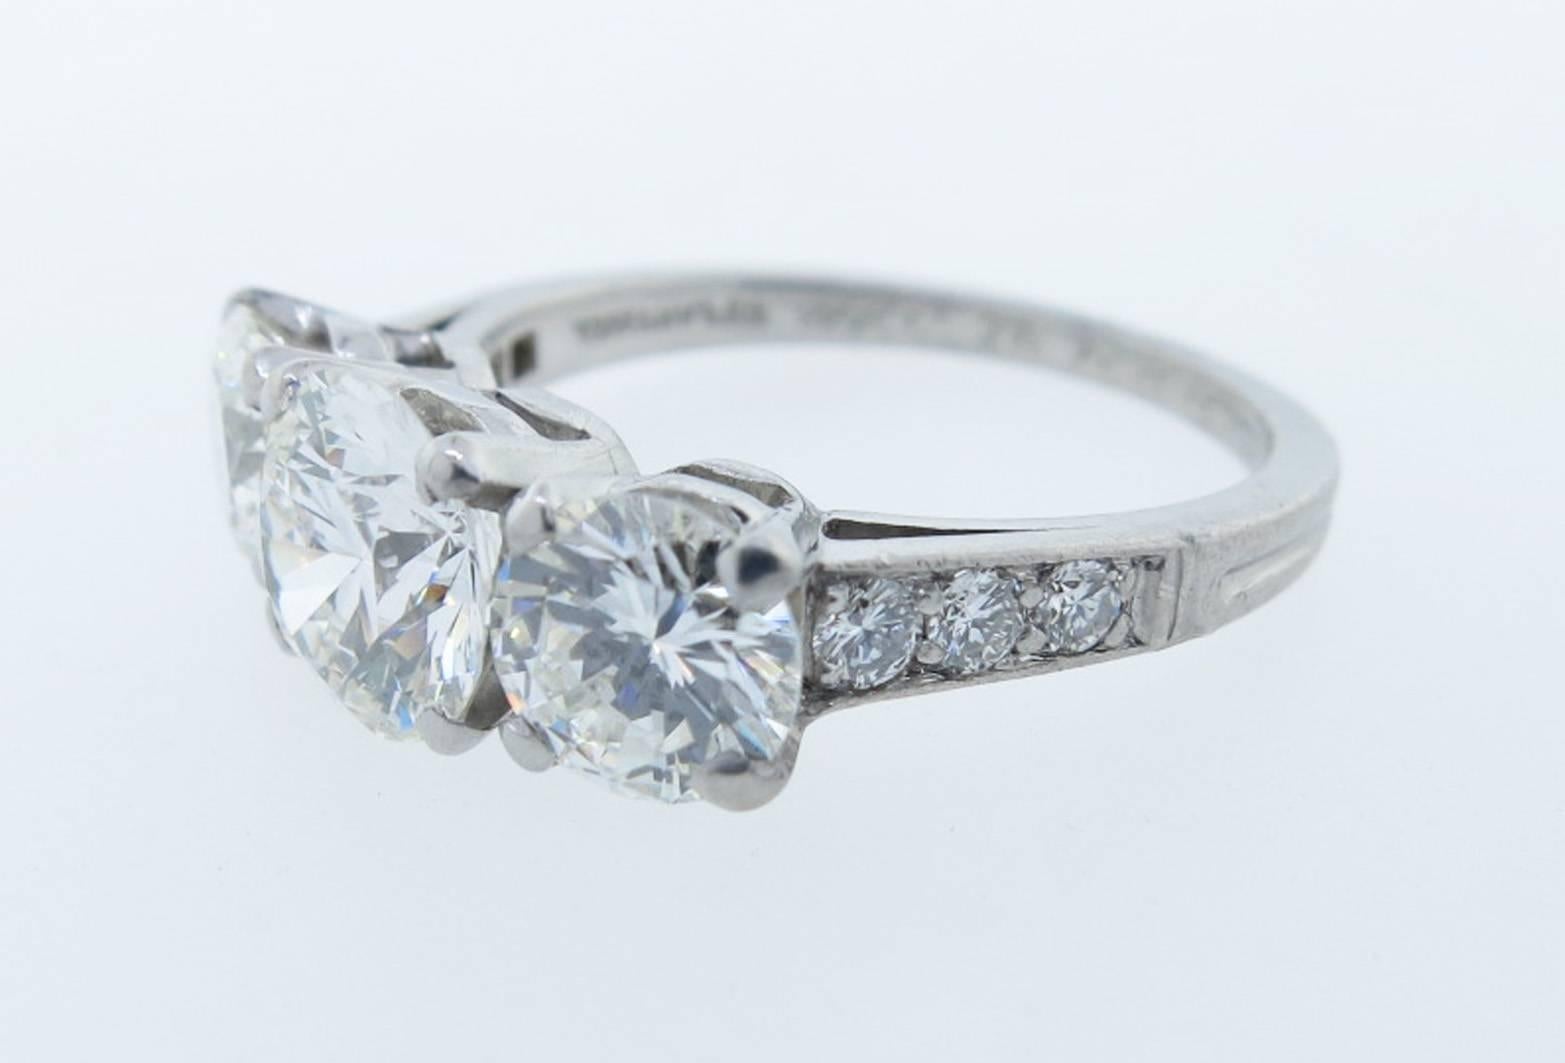 An everlasting classic Tiffany & Co. diamond ring in platinum. The center is prong set with a round brilliant GIA report diamond weighing 1.1cts. grading VVS1 I color. Each side is set with a round brilliant cut diamond weighing approx .55cts.